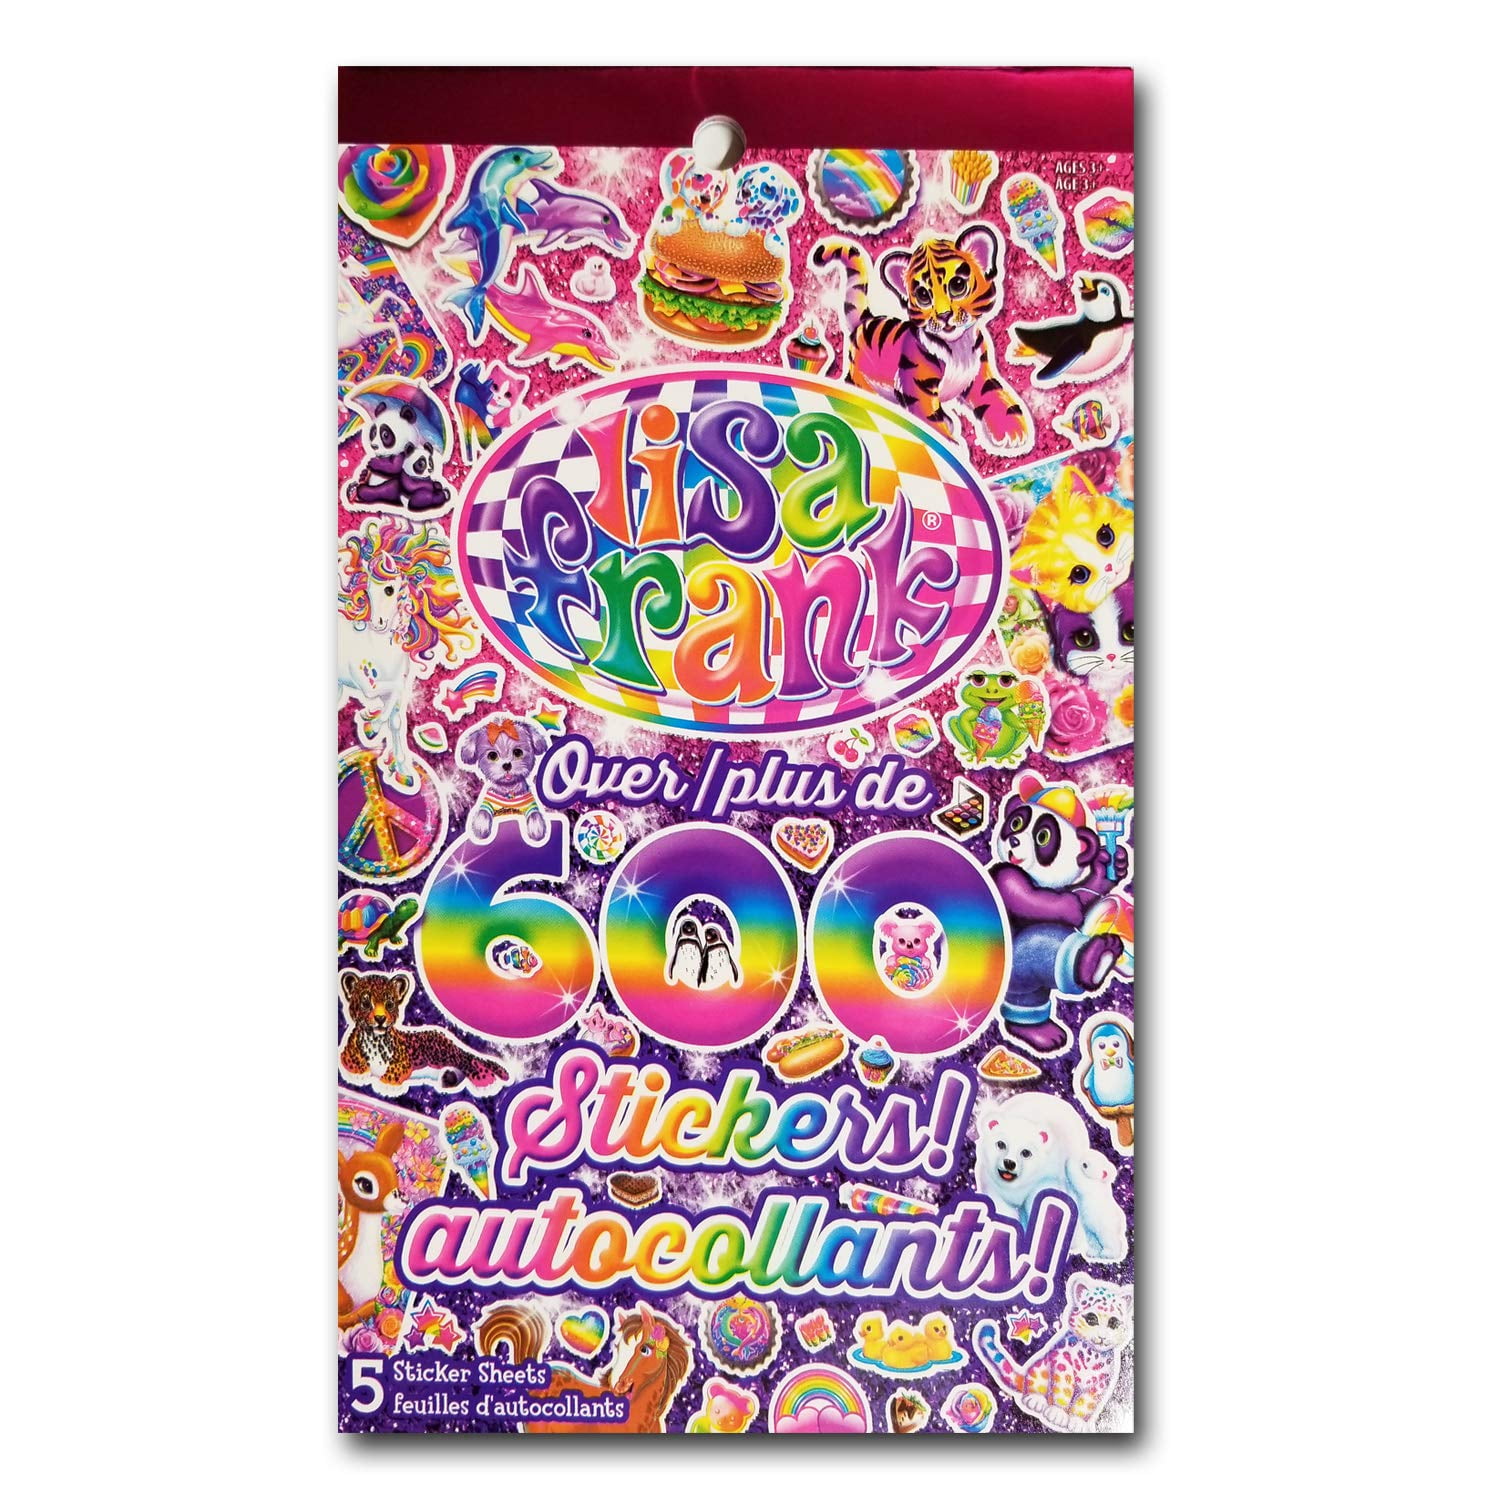 Loving this Lisa Frank coloring book found at dollar store : r/Coloring